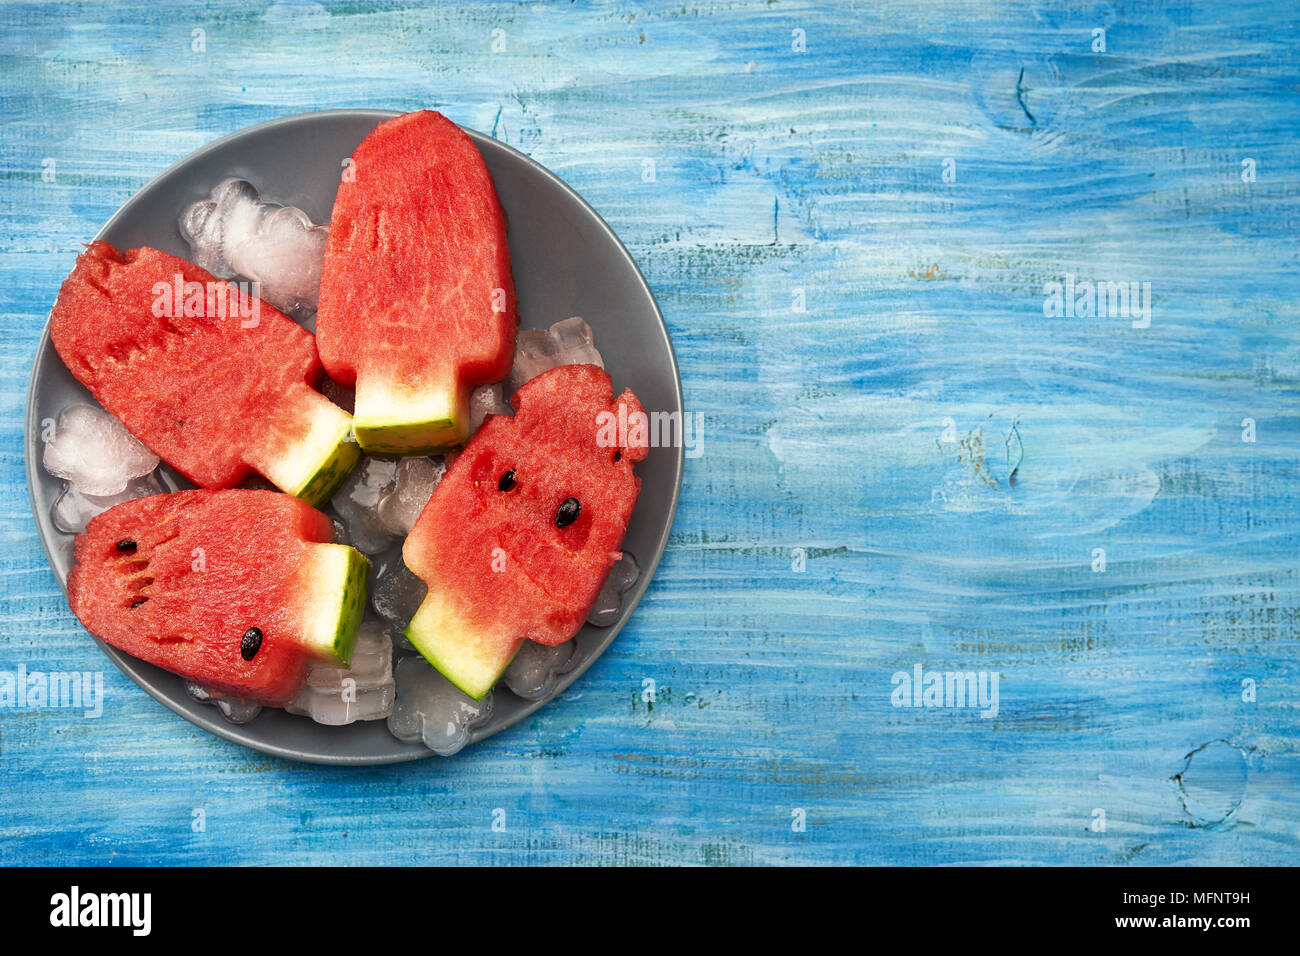 Watermelon peaces cut in ice cream lolly pop shape on bright blue background Stock Photo